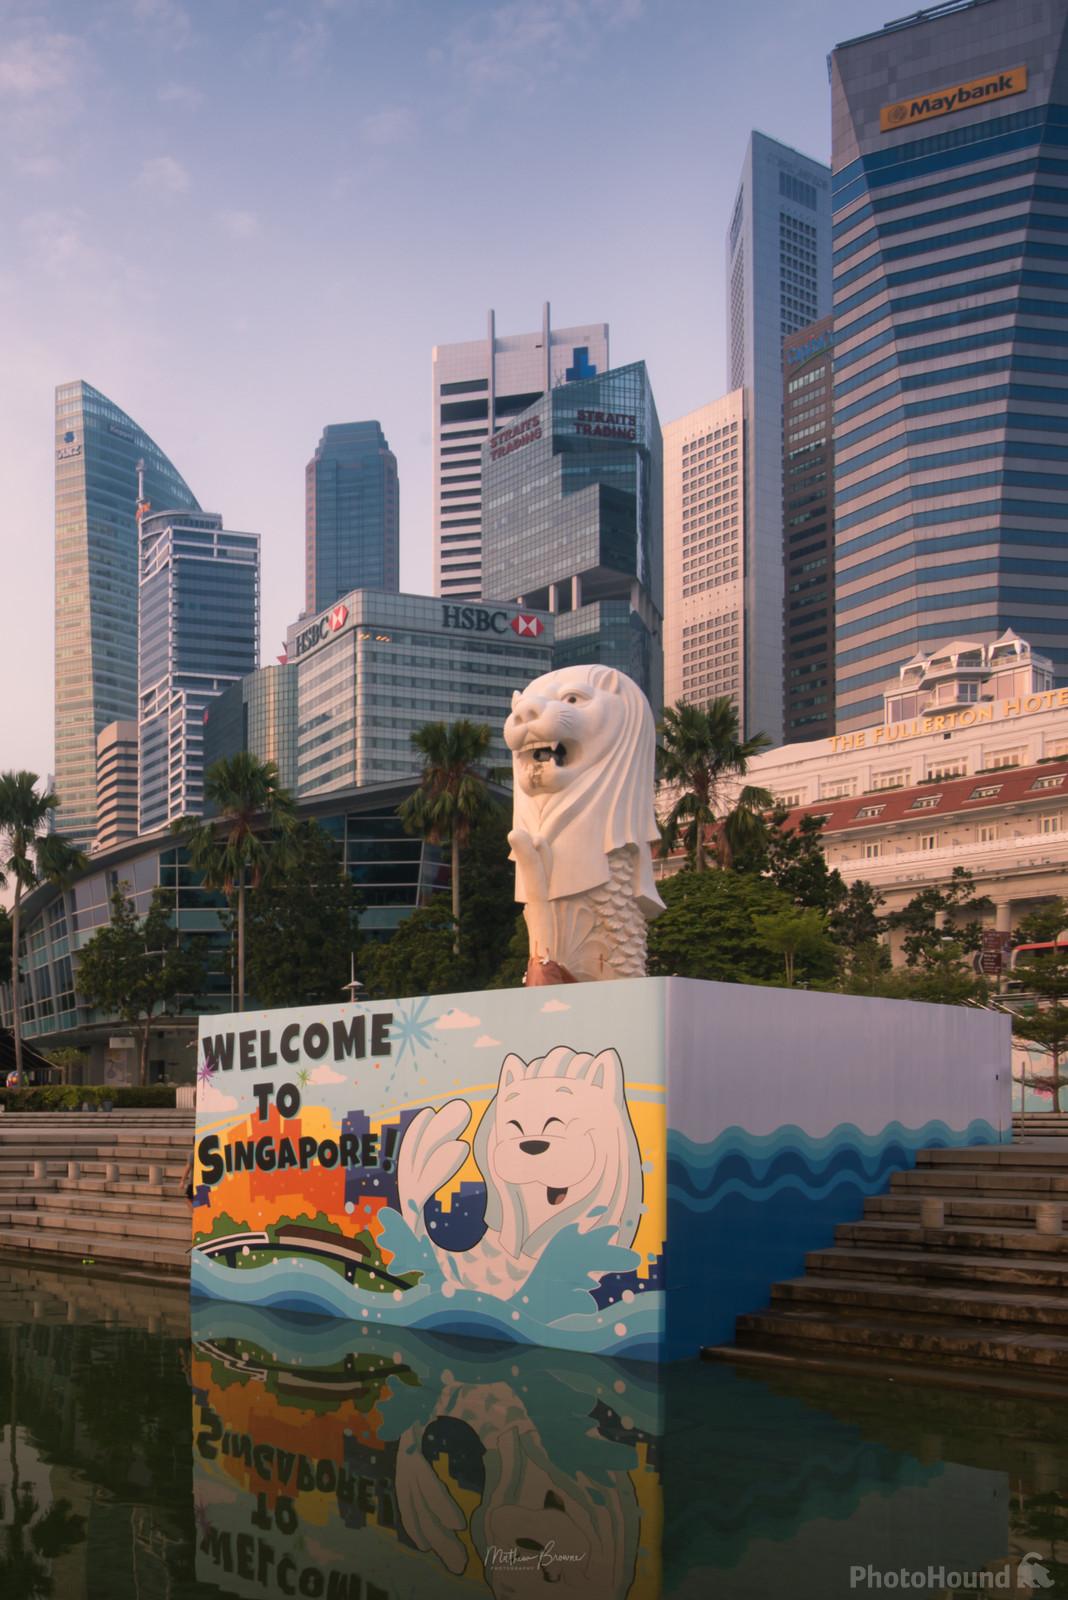 Image of Merlion Park by Mathew Browne